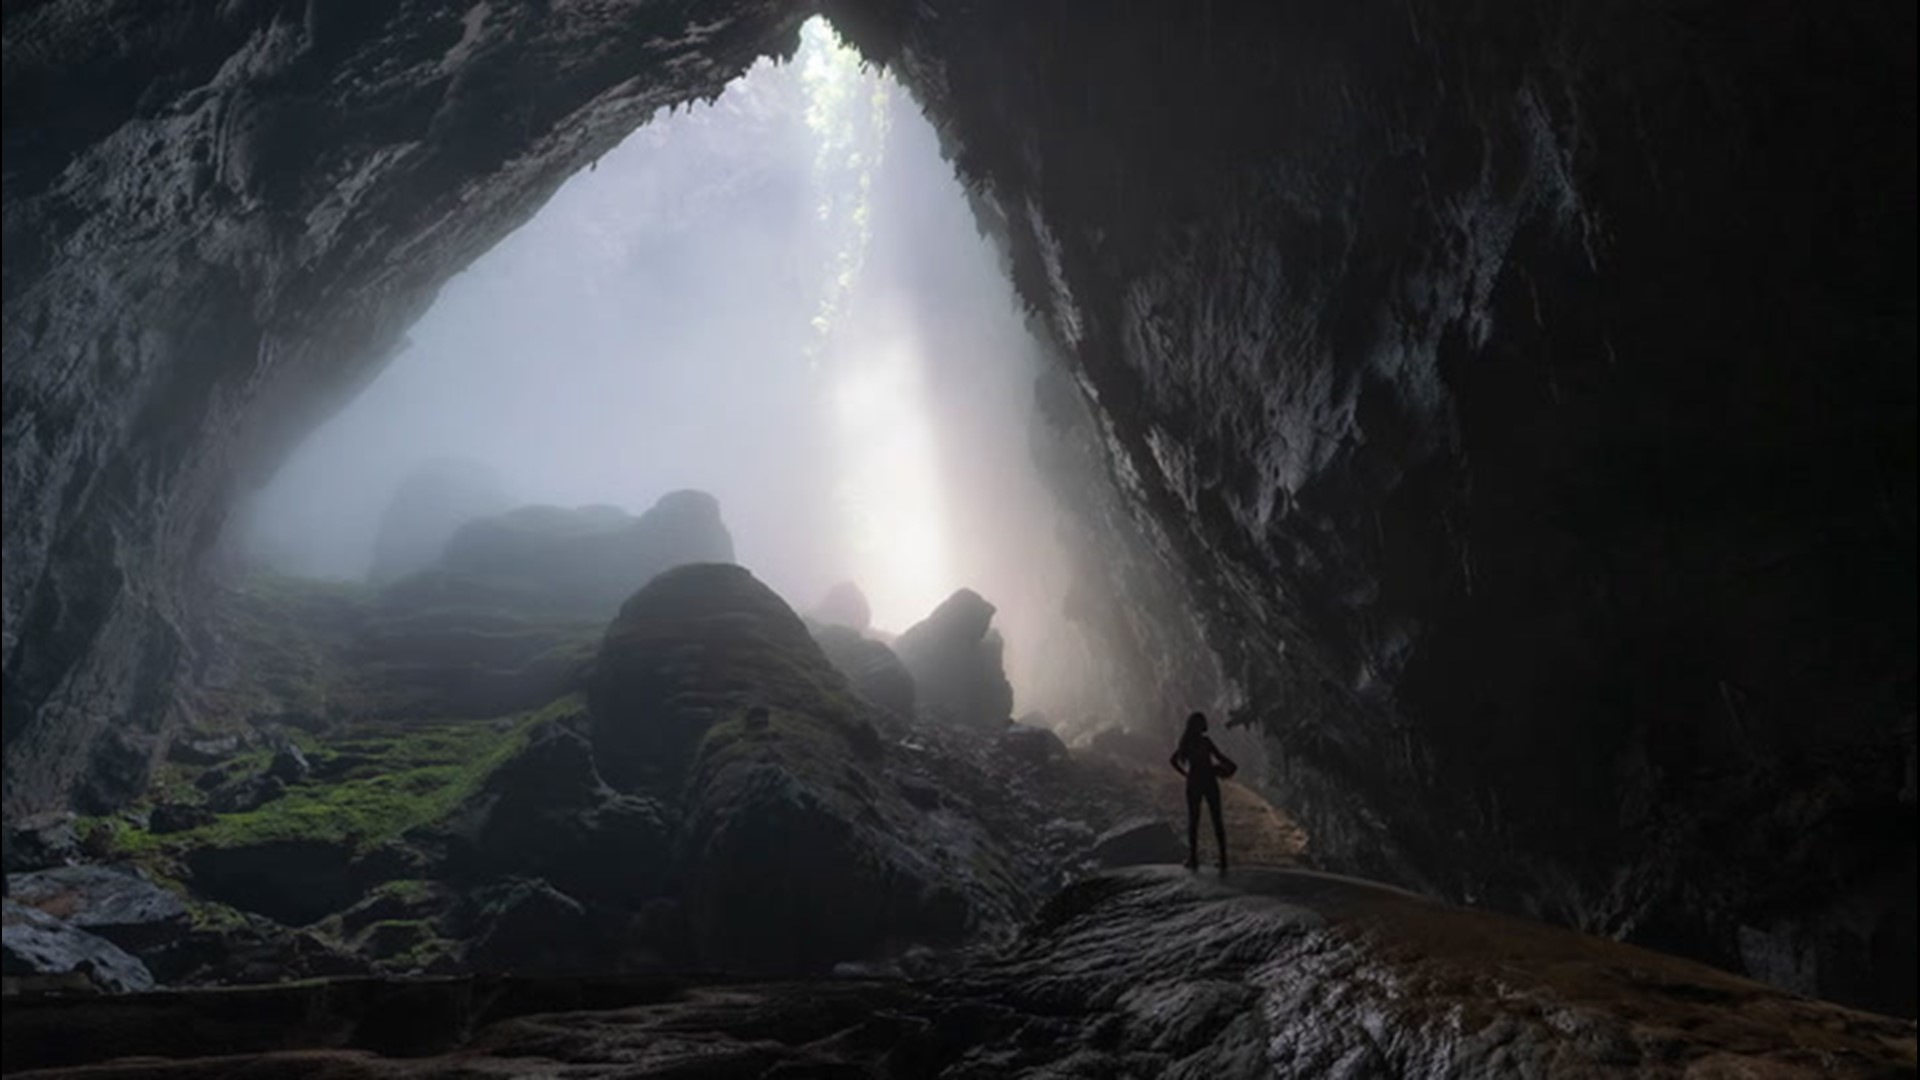 Hang Son Doong Cave in Vietnam is the world's largest cave. It's so large that it even encompasses its own weather system inside with exotic wildlife thriving.